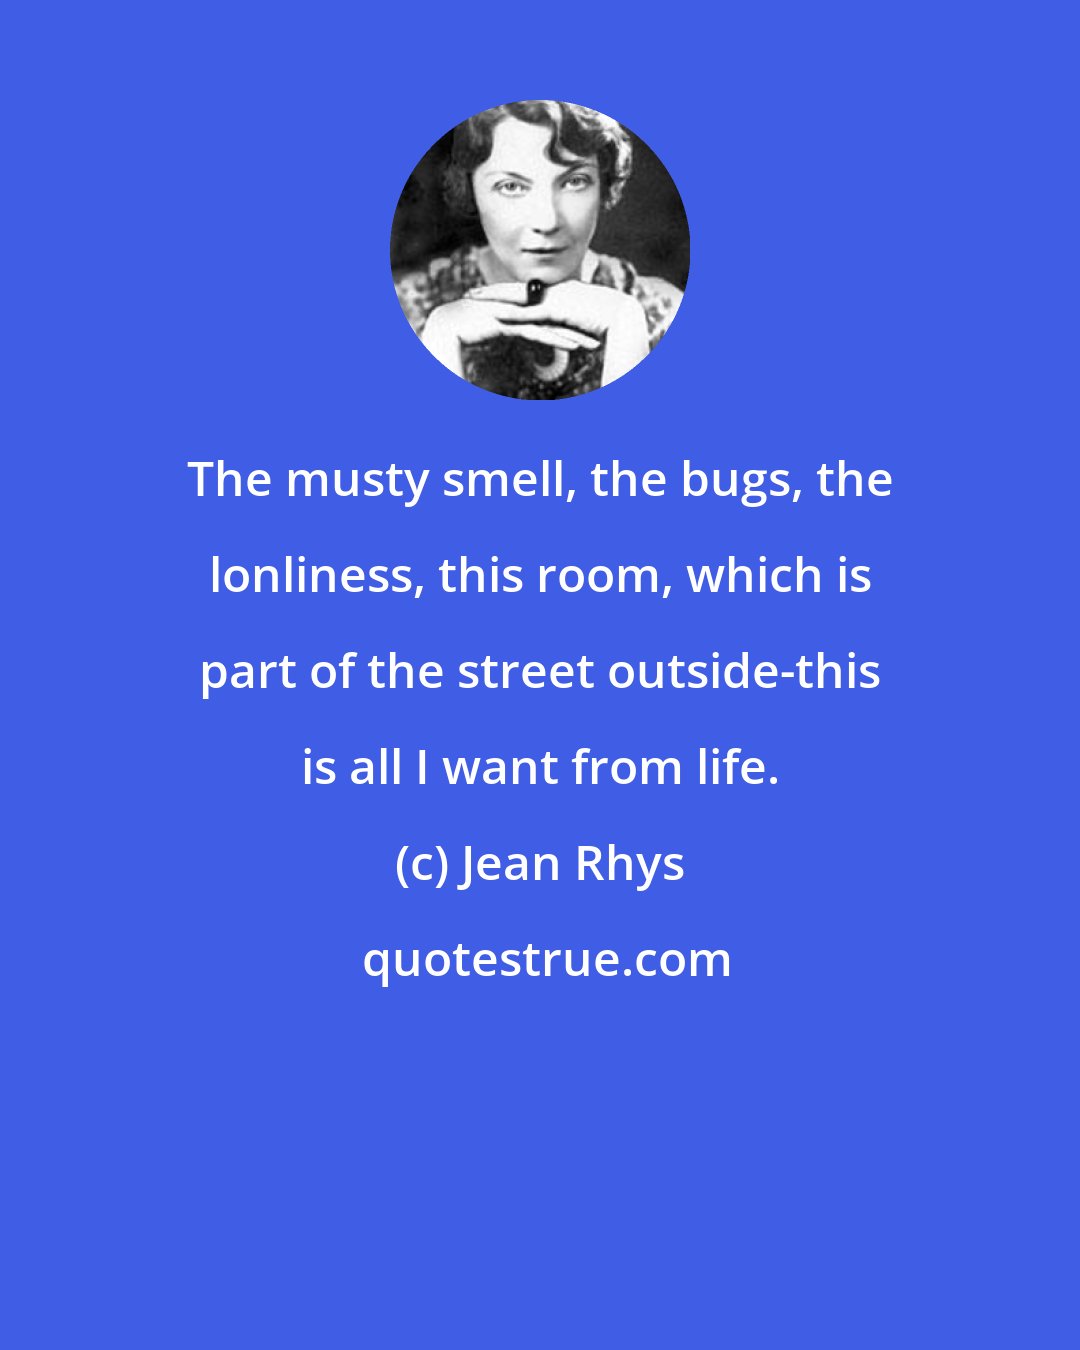 Jean Rhys: The musty smell, the bugs, the lonliness, this room, which is part of the street outside-this is all I want from life.